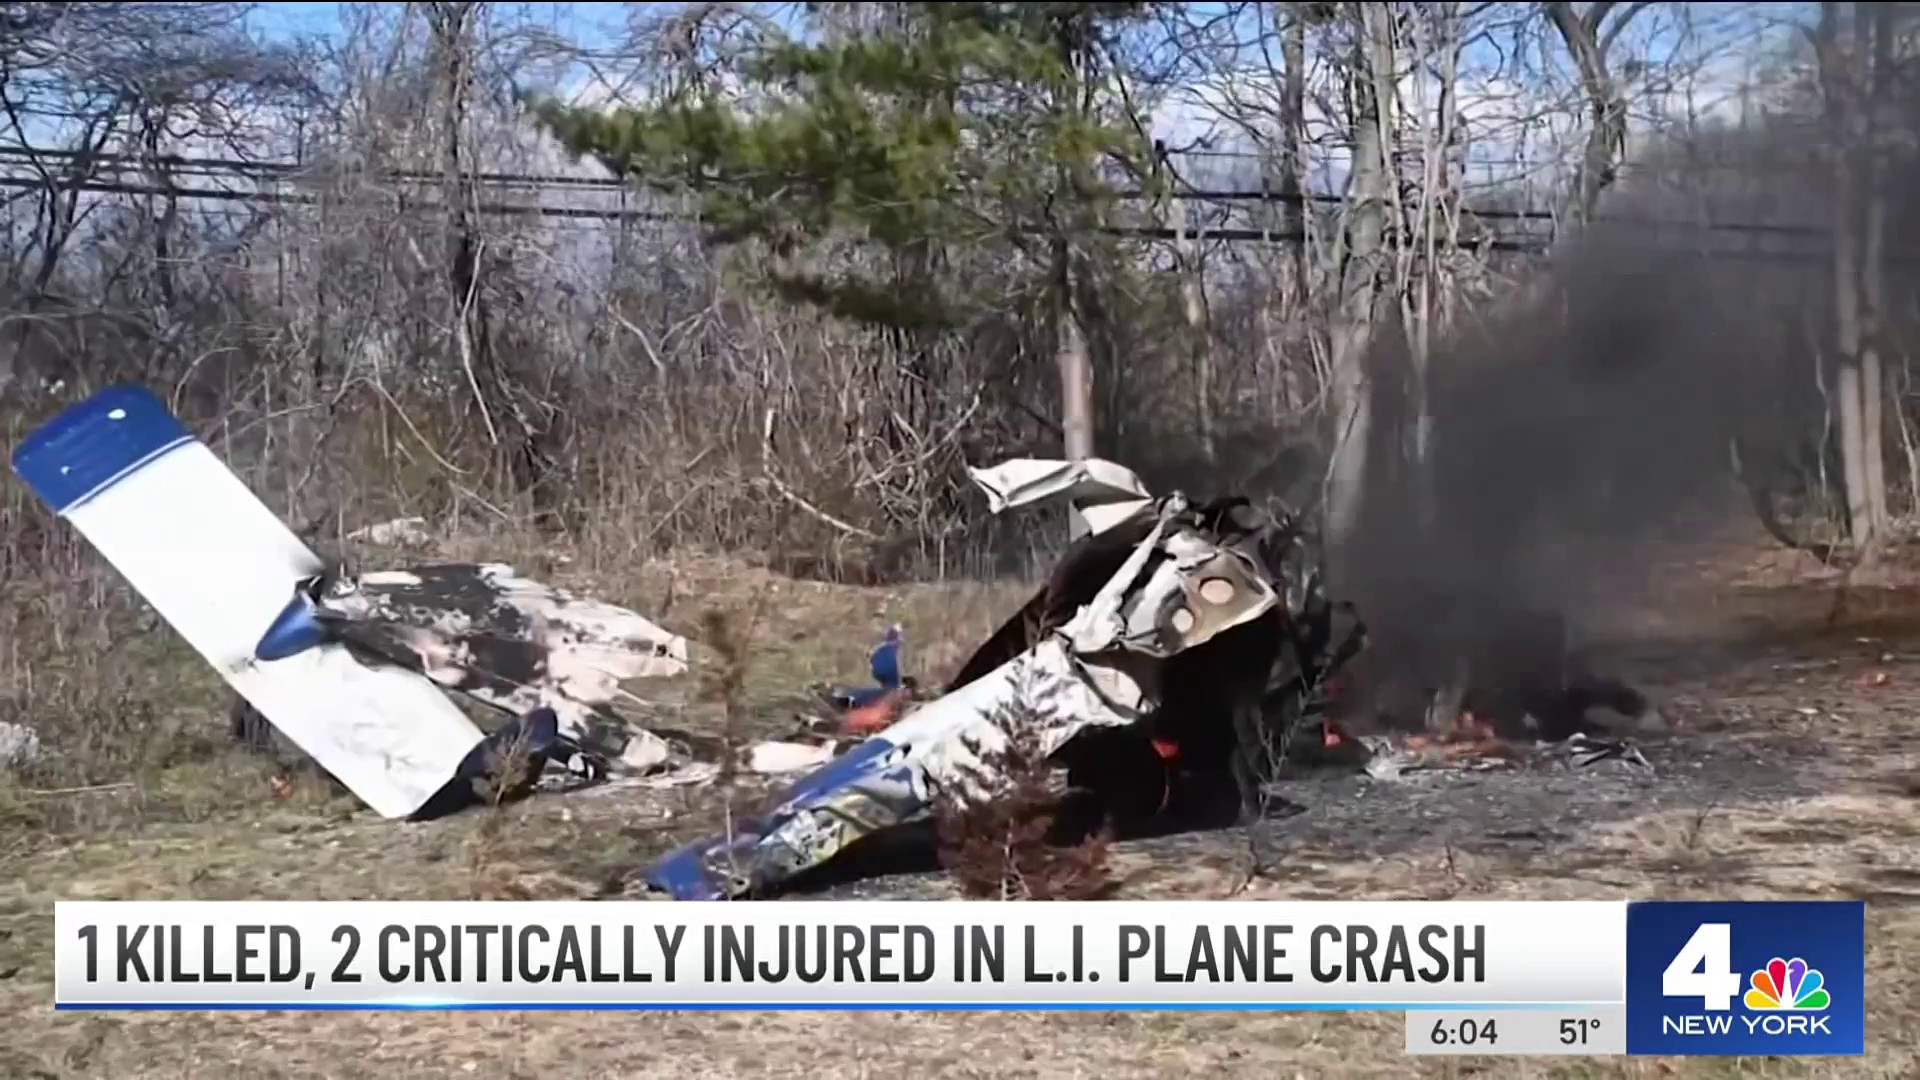 Virginia plane crash: Pilot of unresponsive private jet that crashed and  killed 4 was seen slumped over, source says